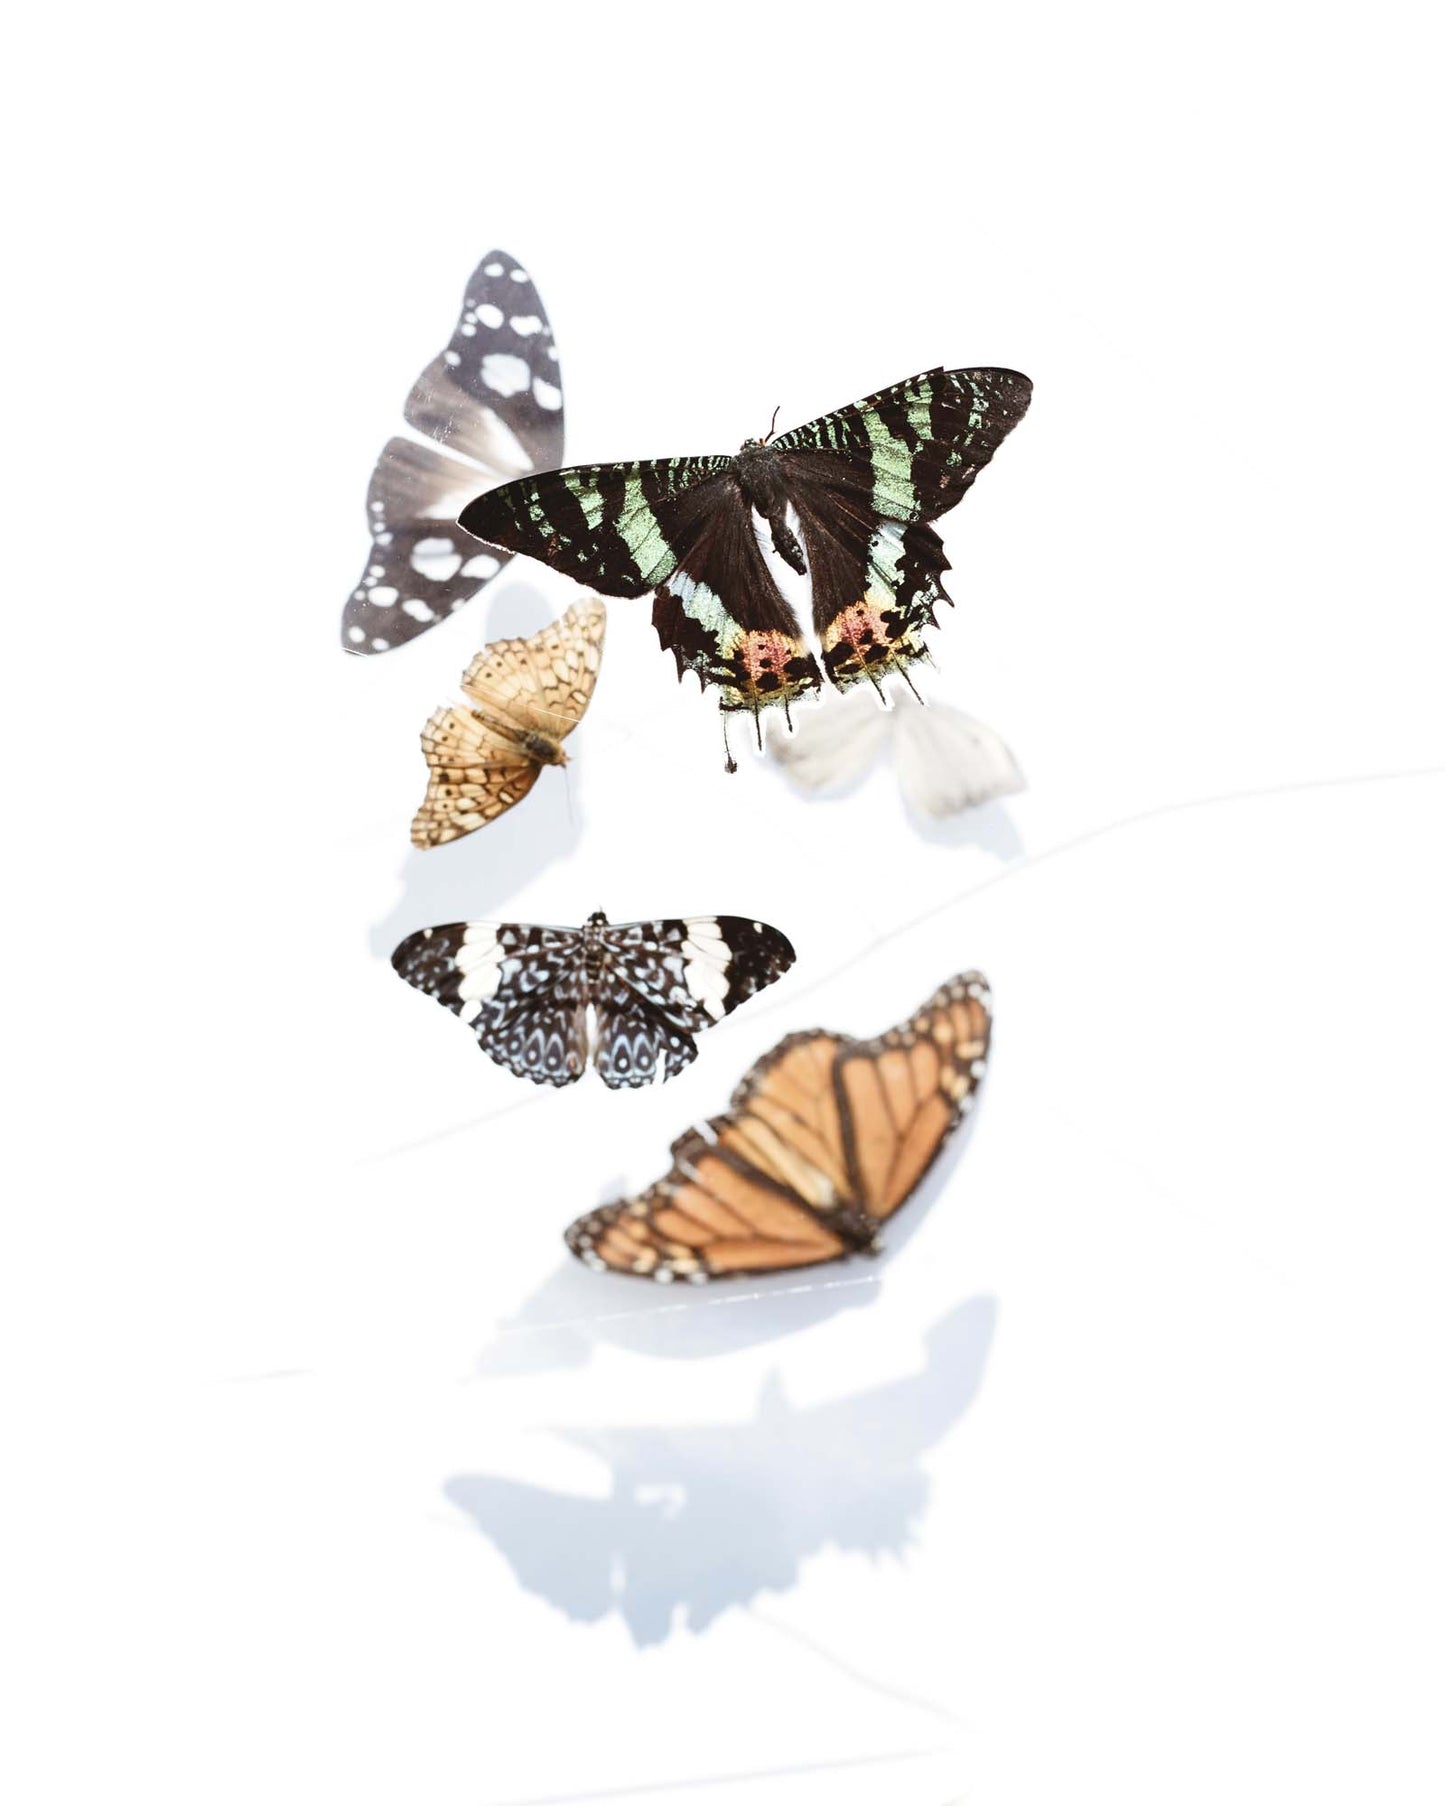 Delicate Shadows Collection No.3, Butterflies Framed Print - USTAD HOME